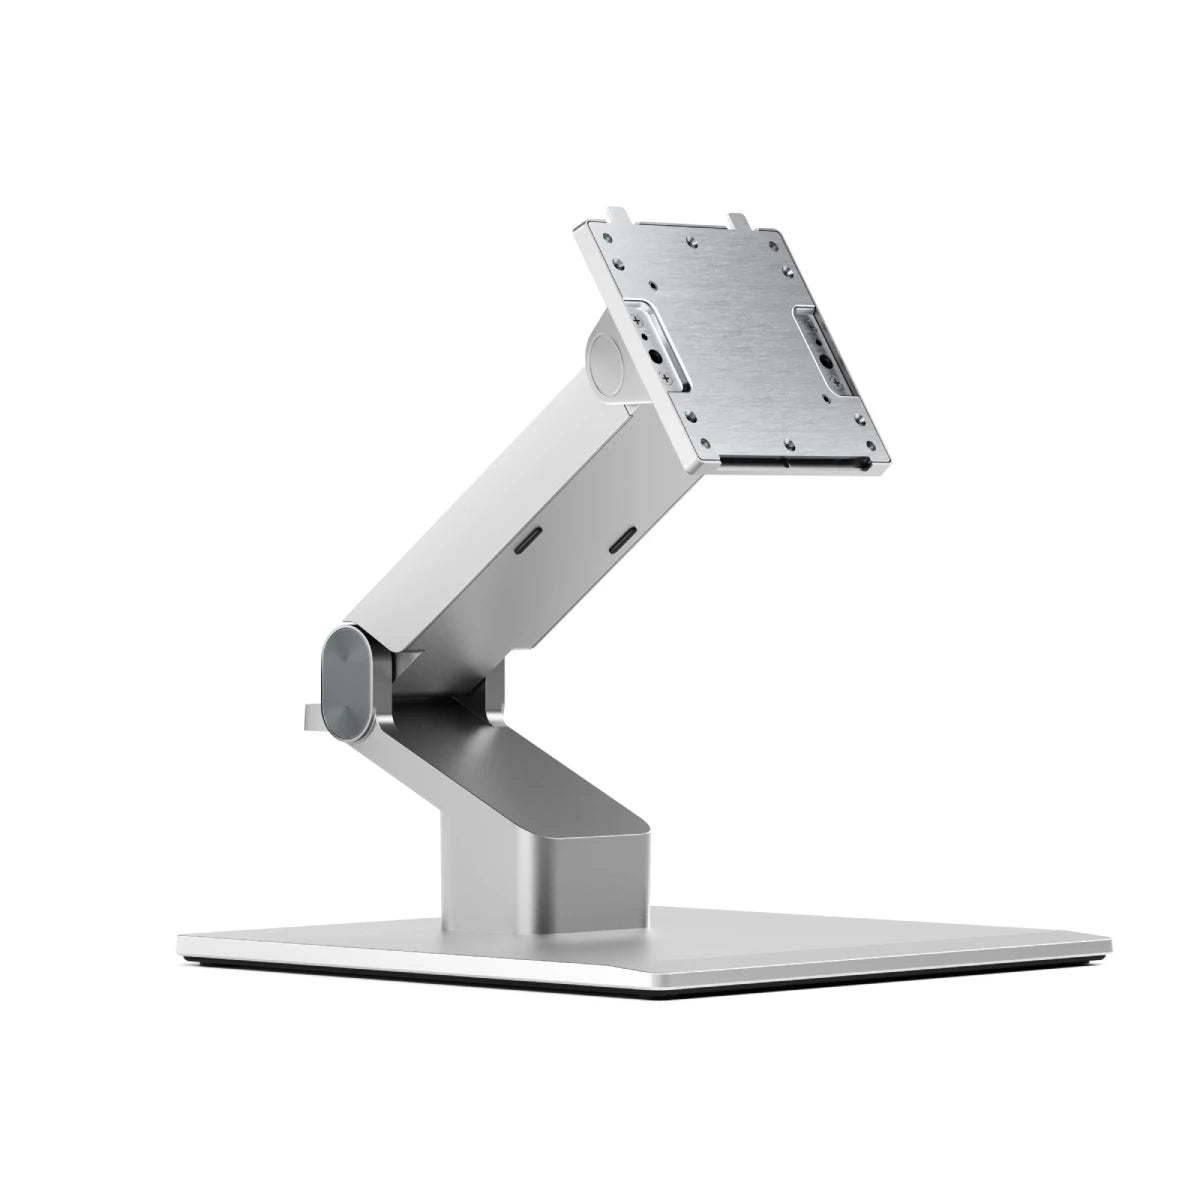 Clarity Fold Stand